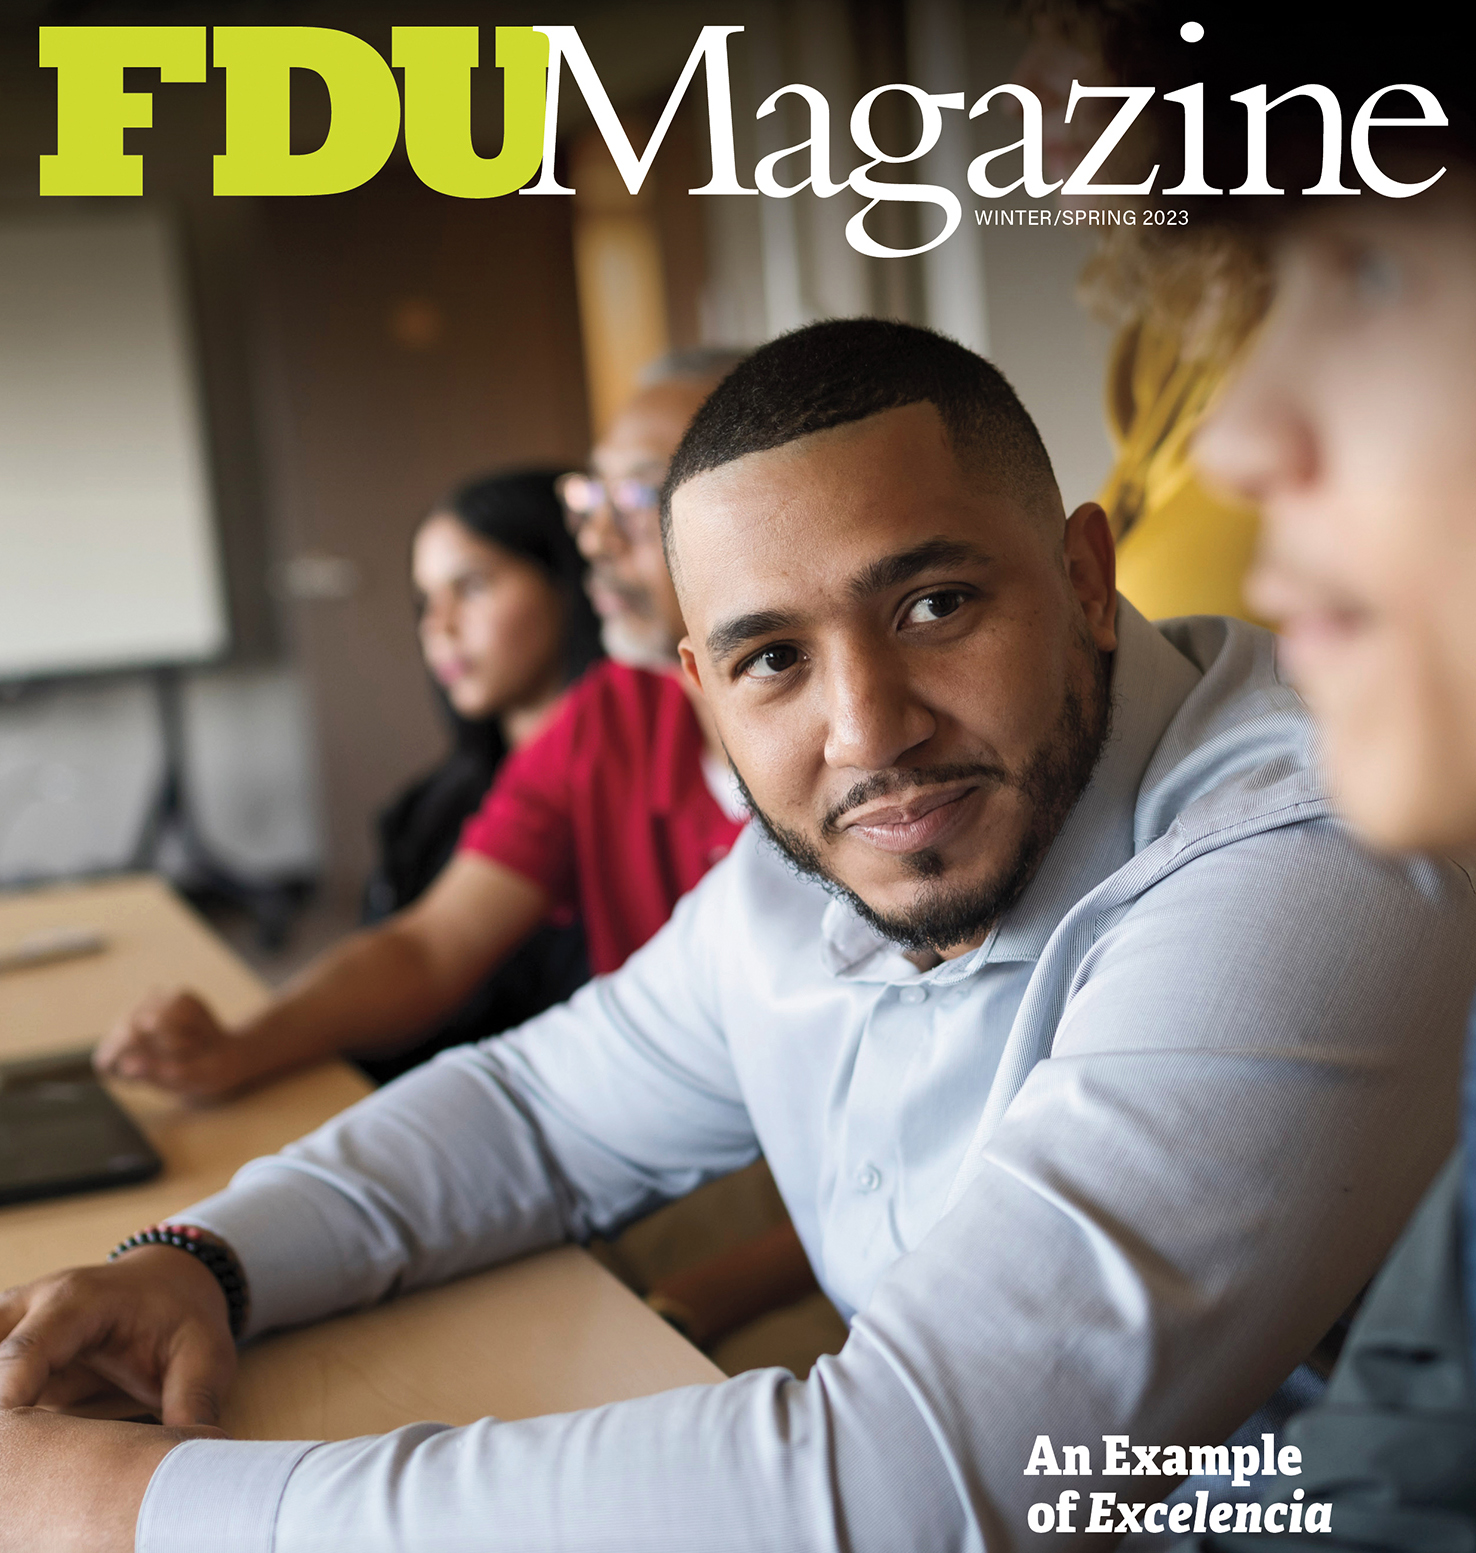 The Winter/Spring 2023 cover of FDU Magazine shows a student sitting a table.